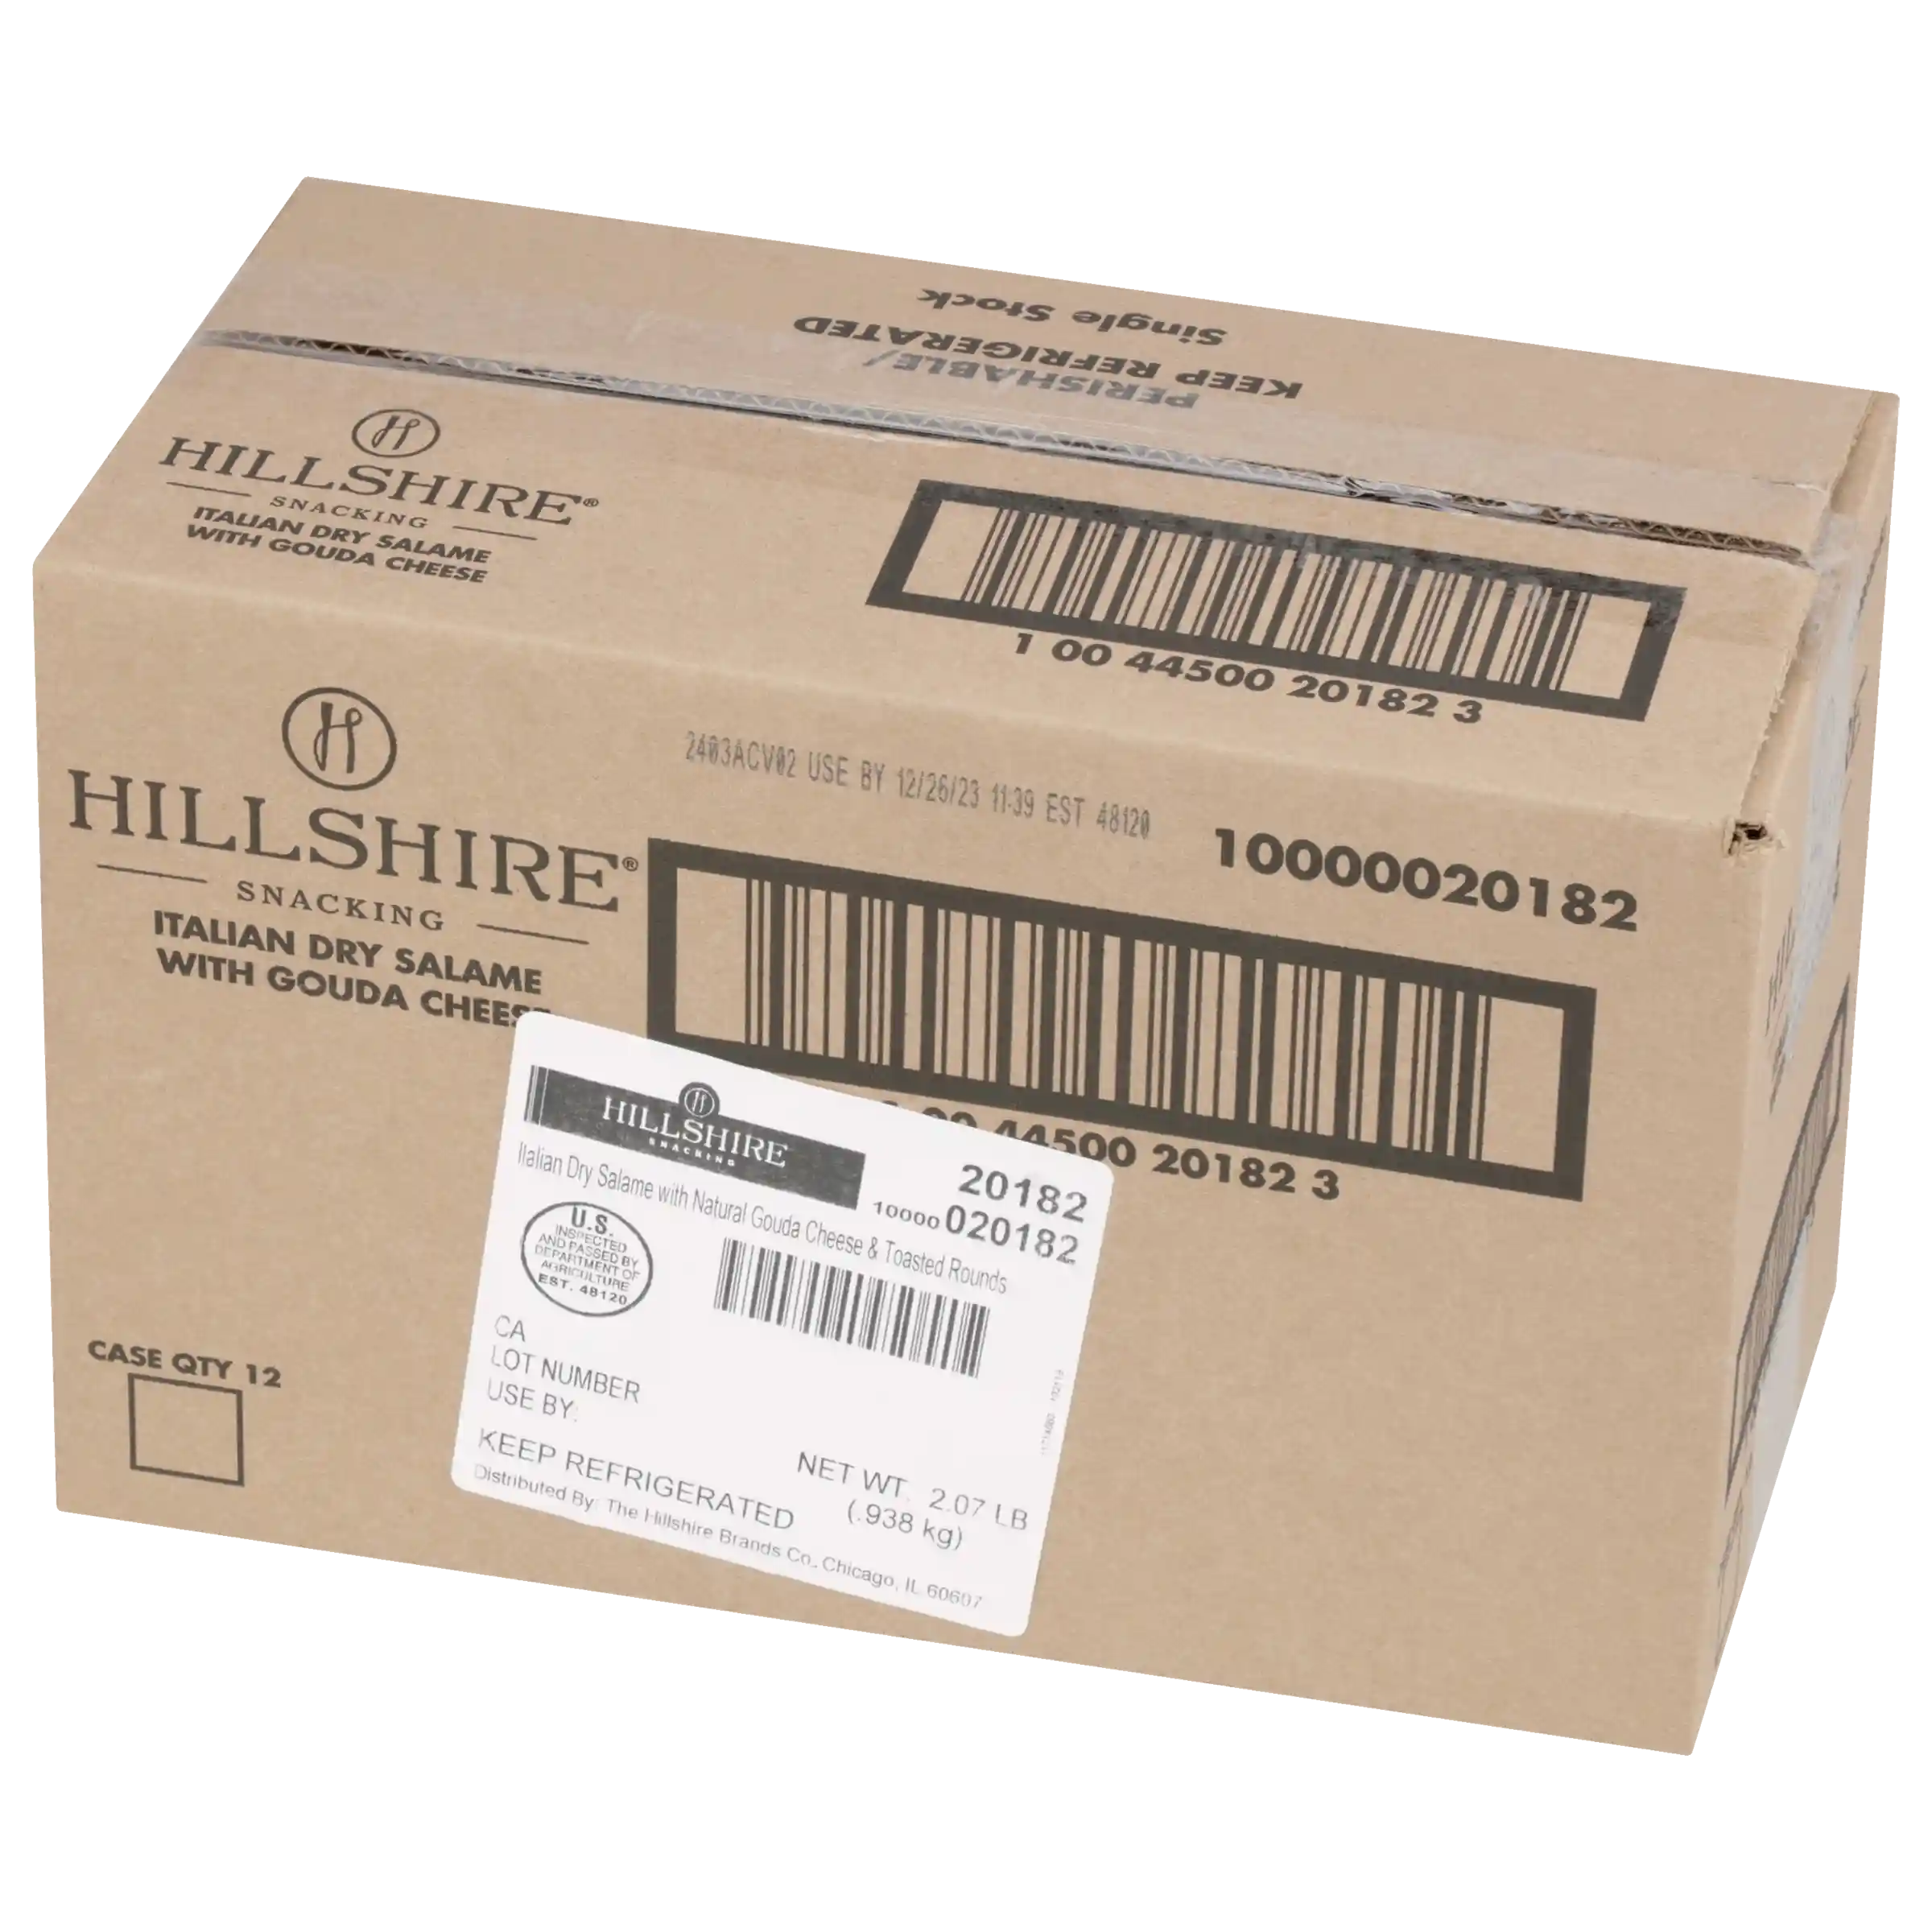 Hillshire® Snacking Small Plates, Italian Dry Salame Deli Lunch Meat and Gouda Cheese, 2.76 oz_image_31